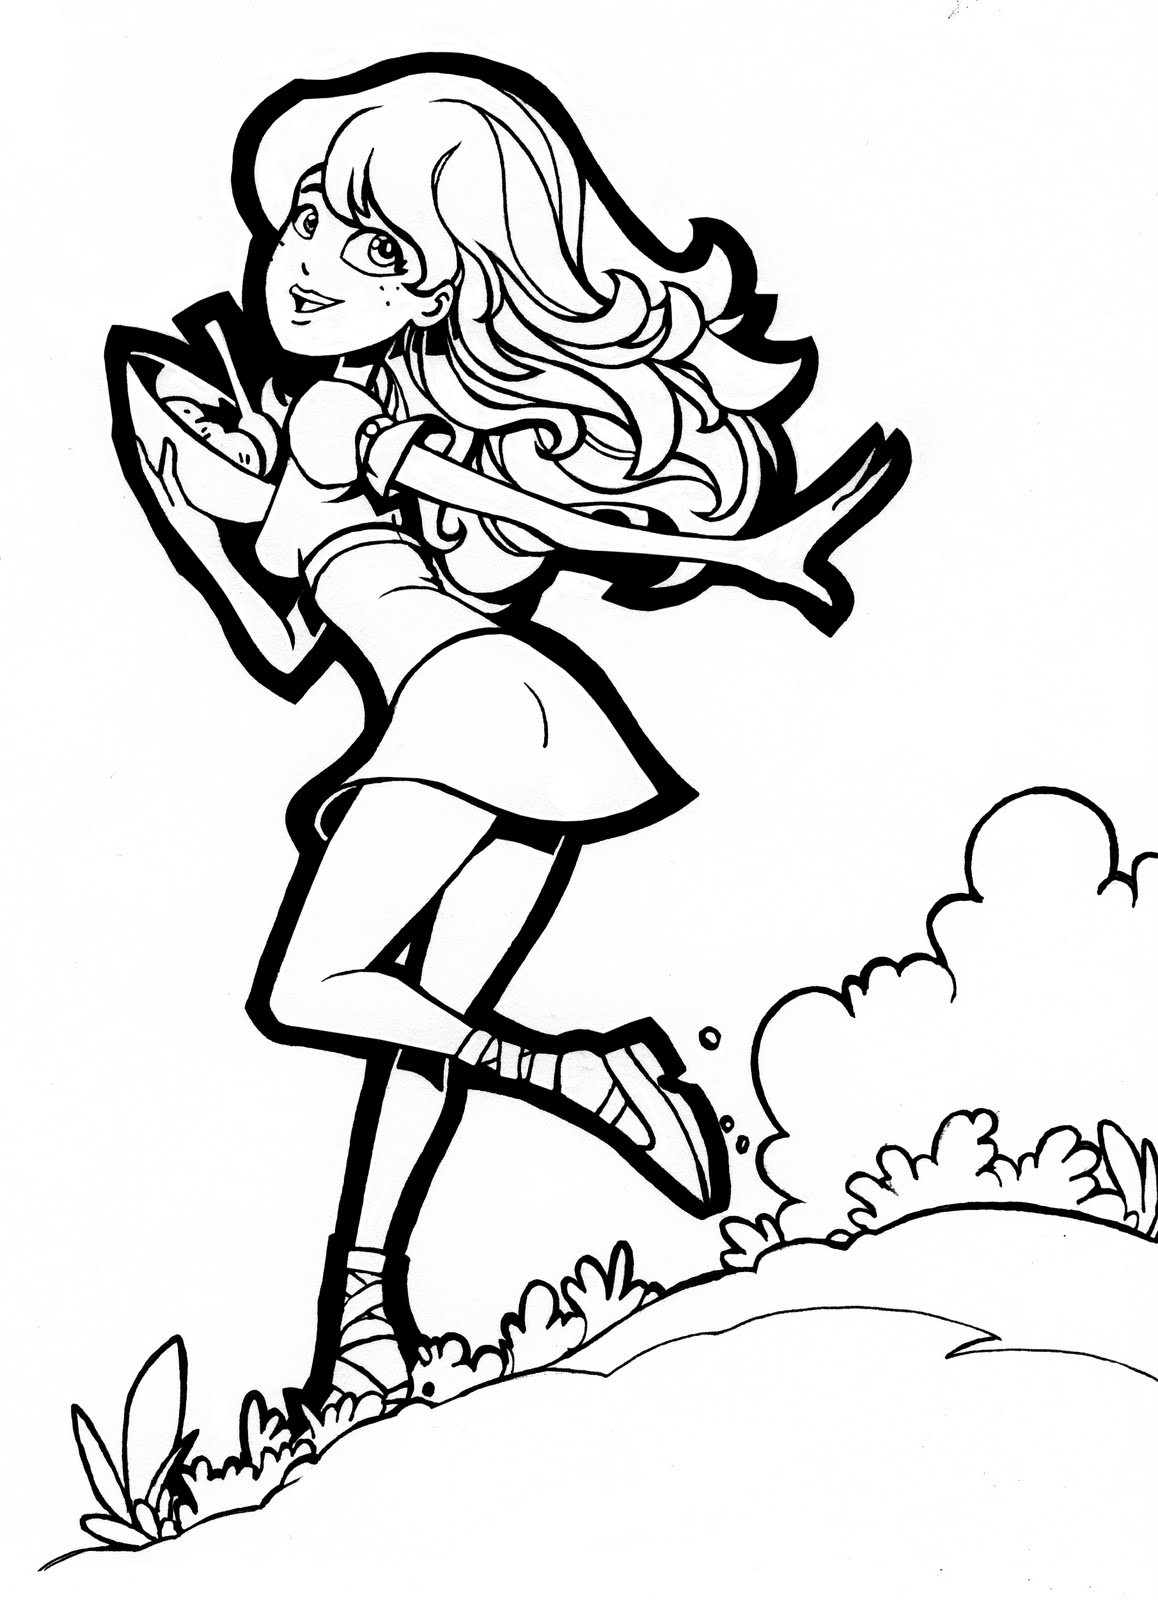 Coloring Sheets Of Girls
 50 Lovely Coloring Pages for Girls